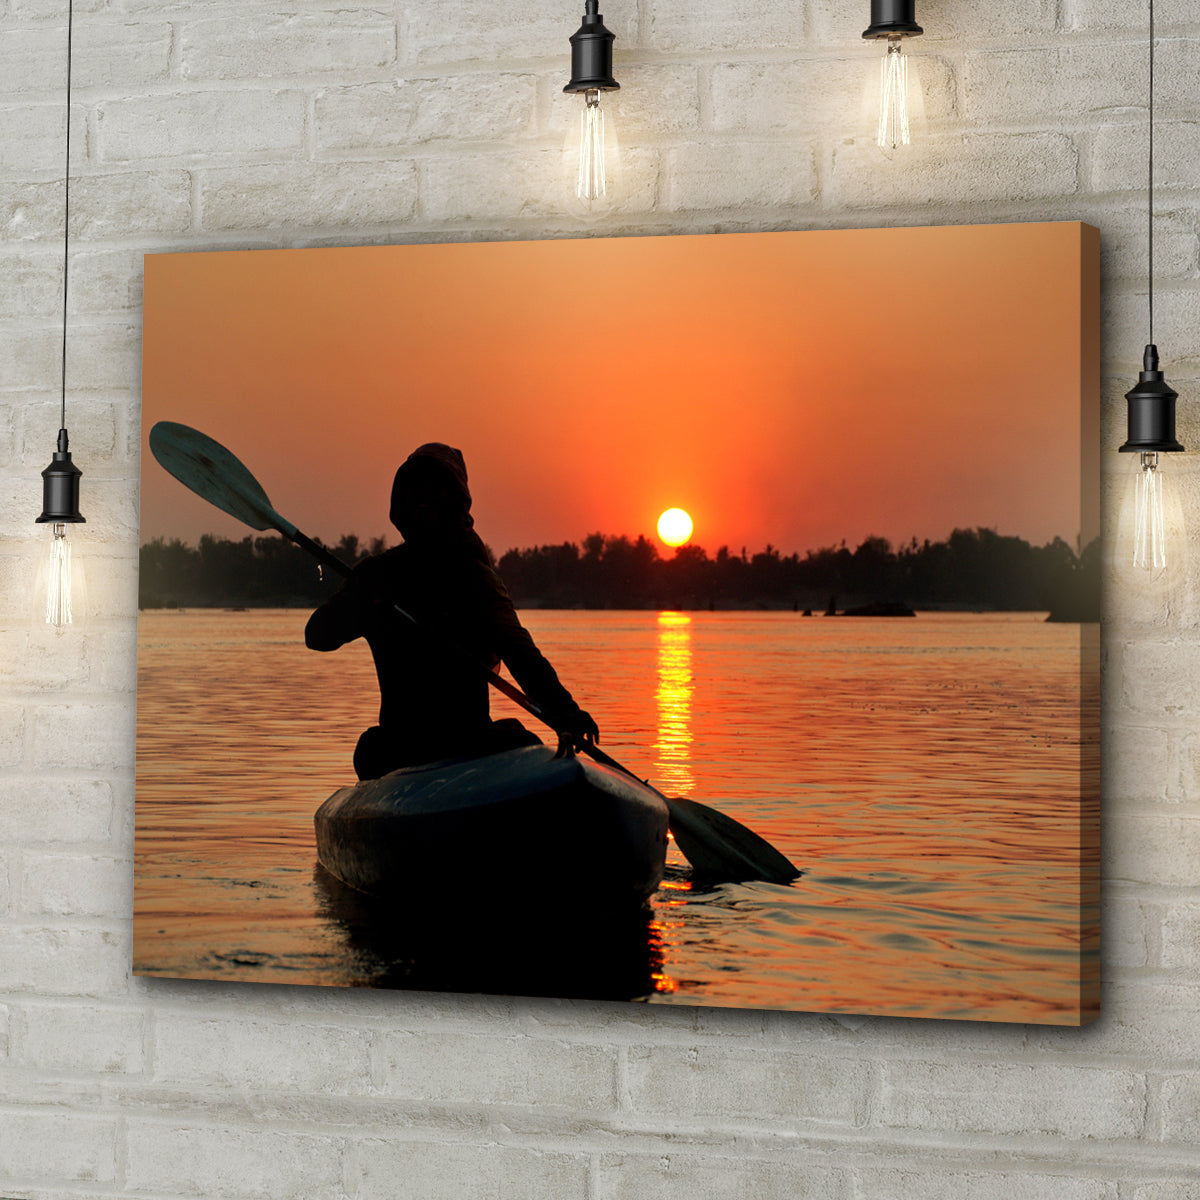 Kayak Sunset Silhouette Canvas Wall Art Style 2 - Image by Tailored Canvases